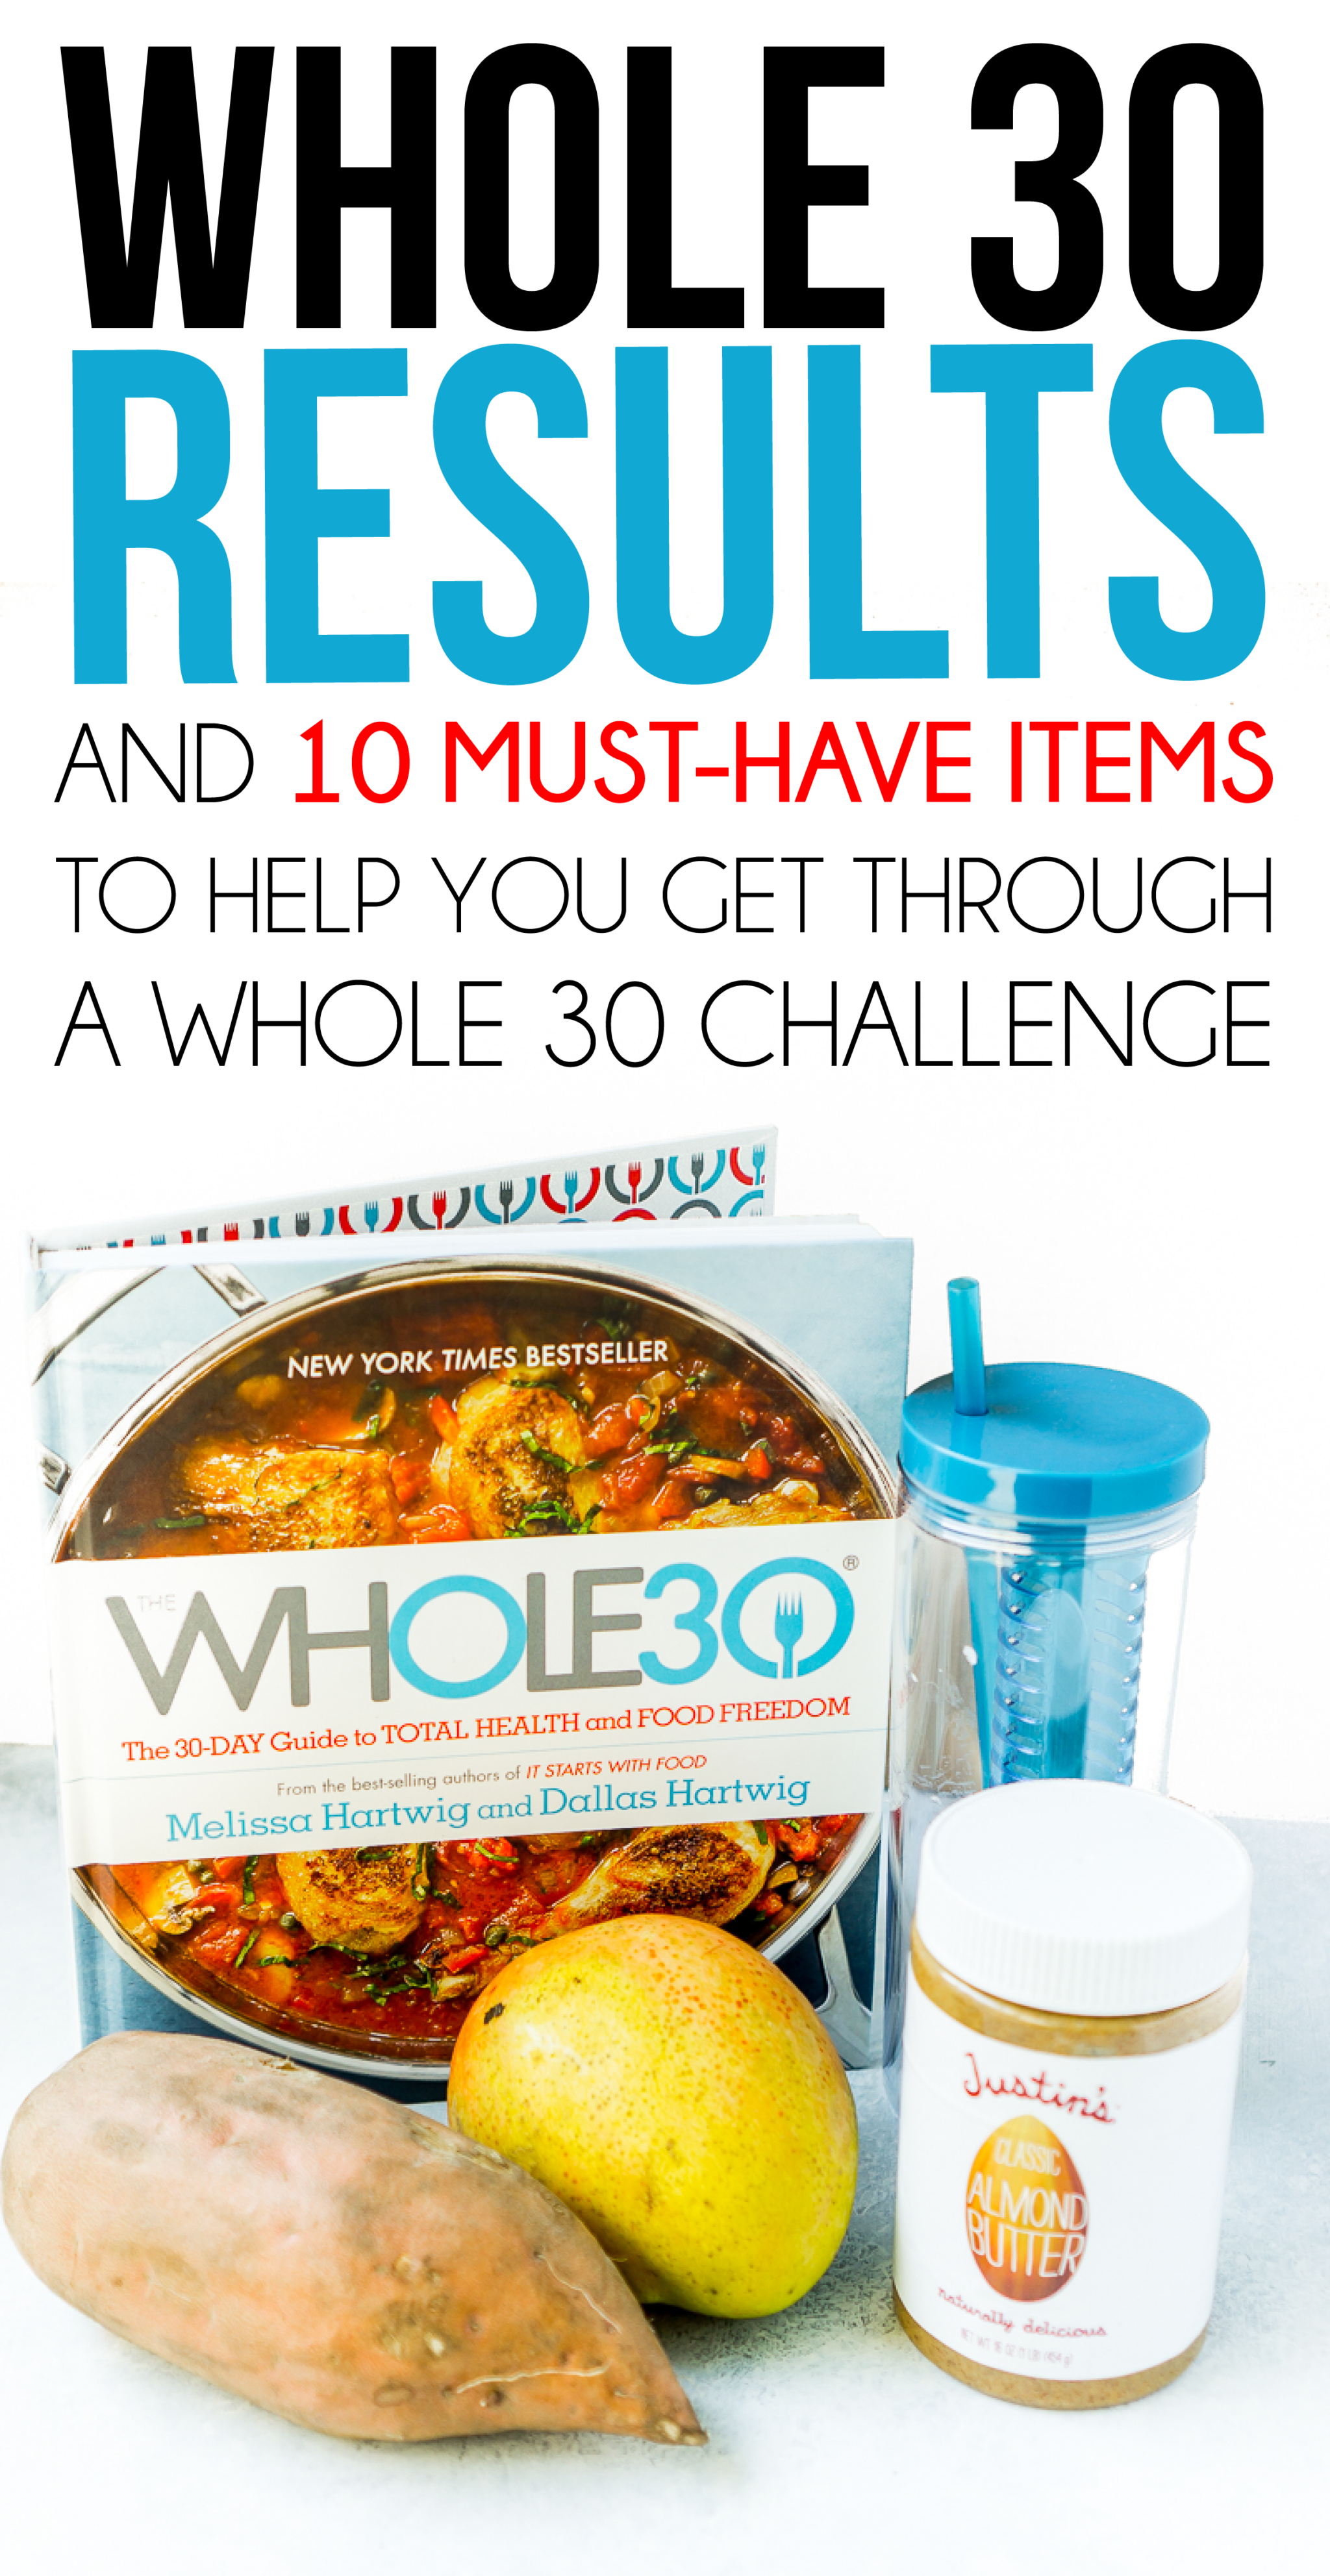 Whole 30 results aren't just about weight loss! 